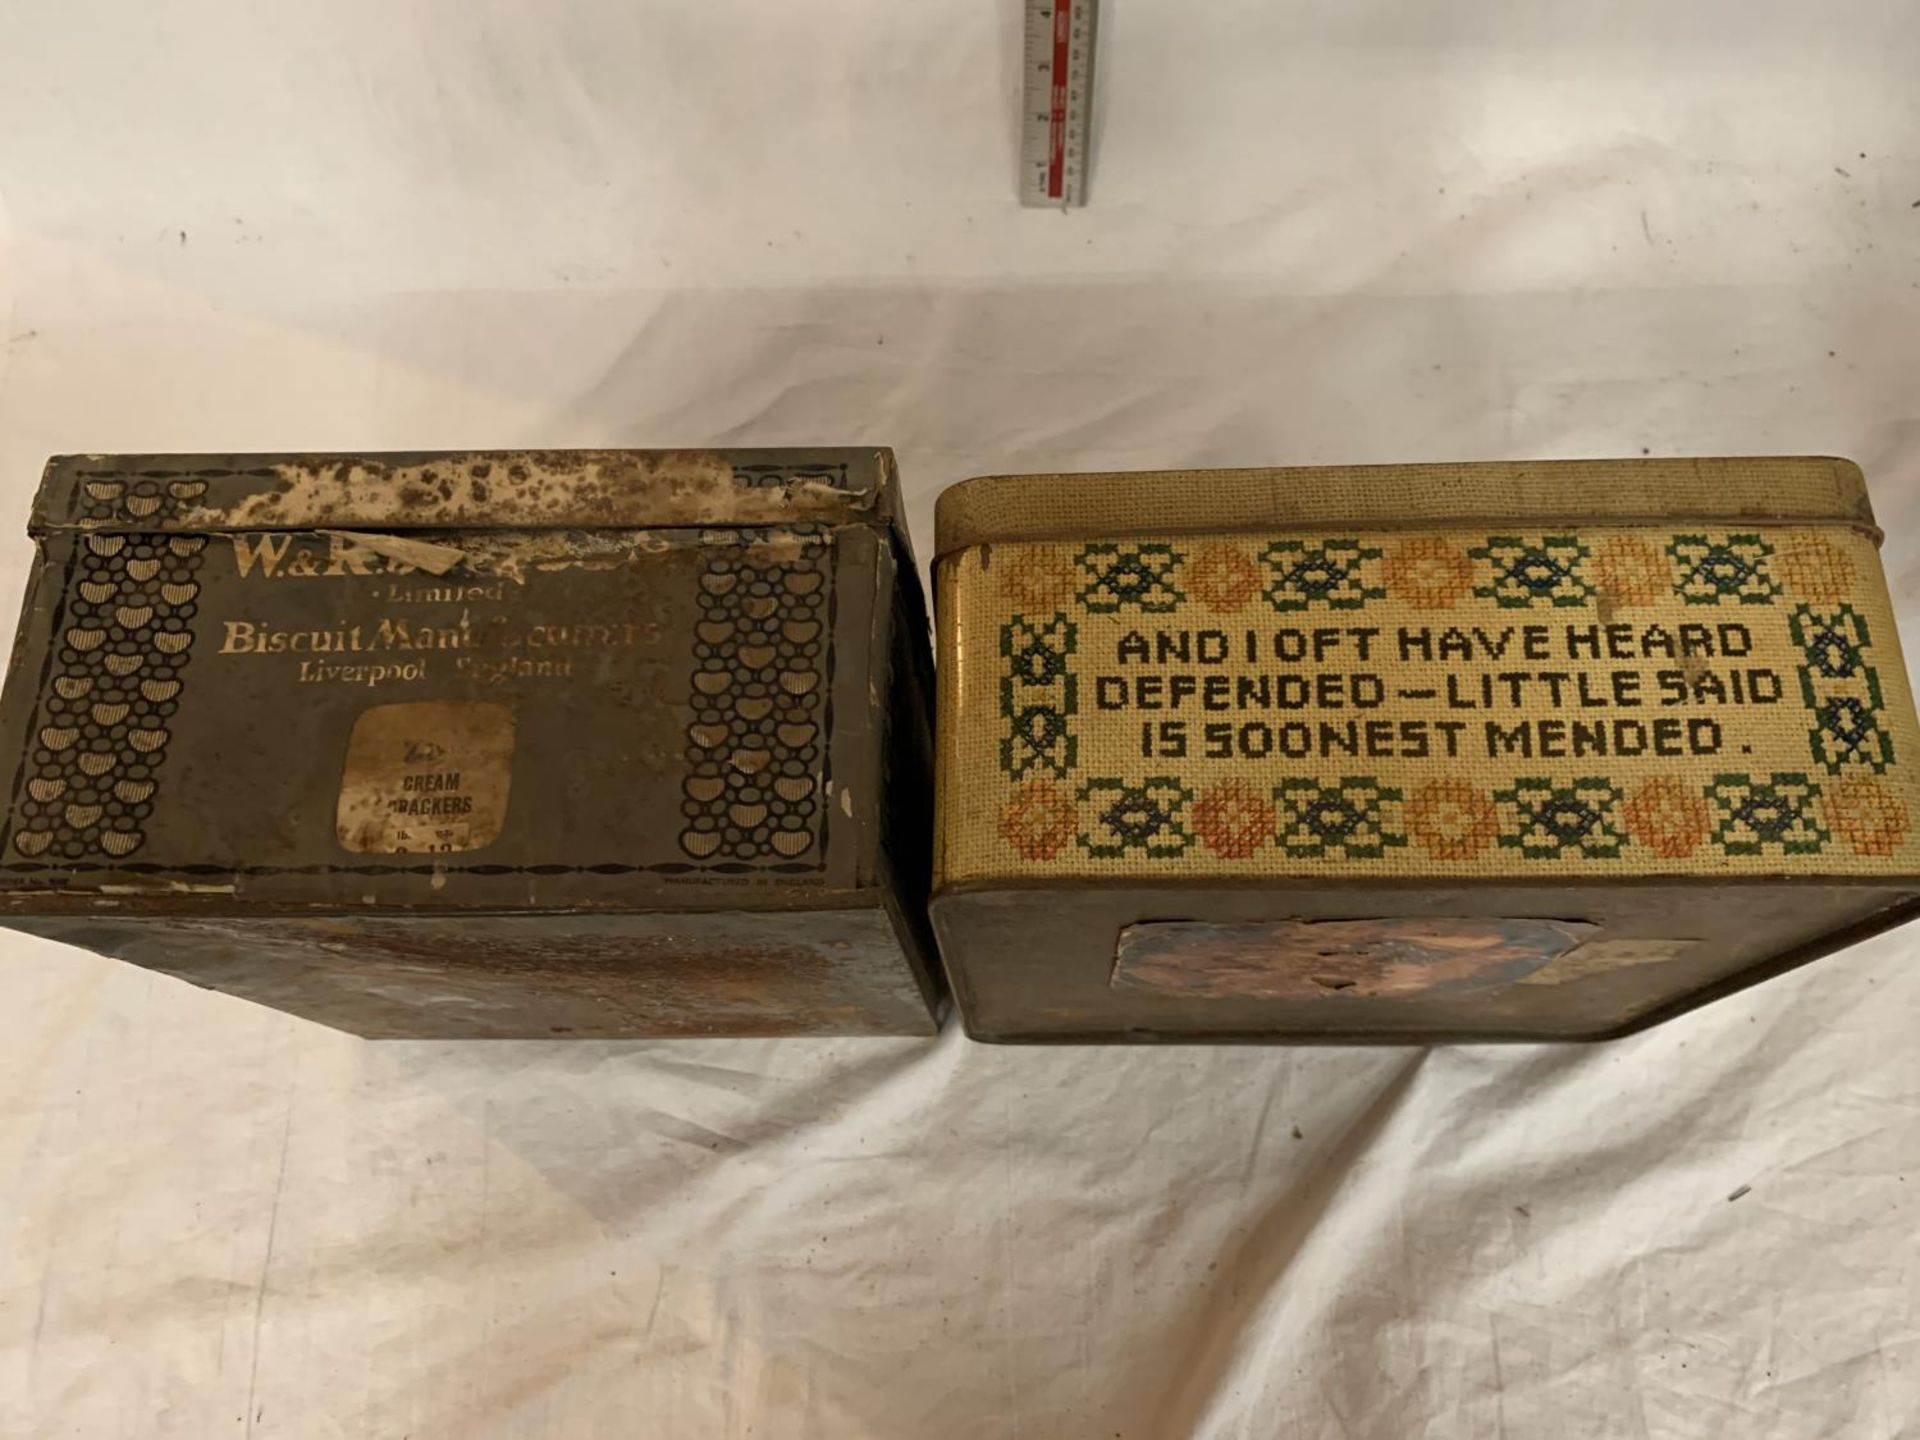 TWO ORIGINAL VINTAGE TINS TO INCLUDE JACOBS CREAM CRACKERS AND CARR'S BISCUITS - Image 9 of 12